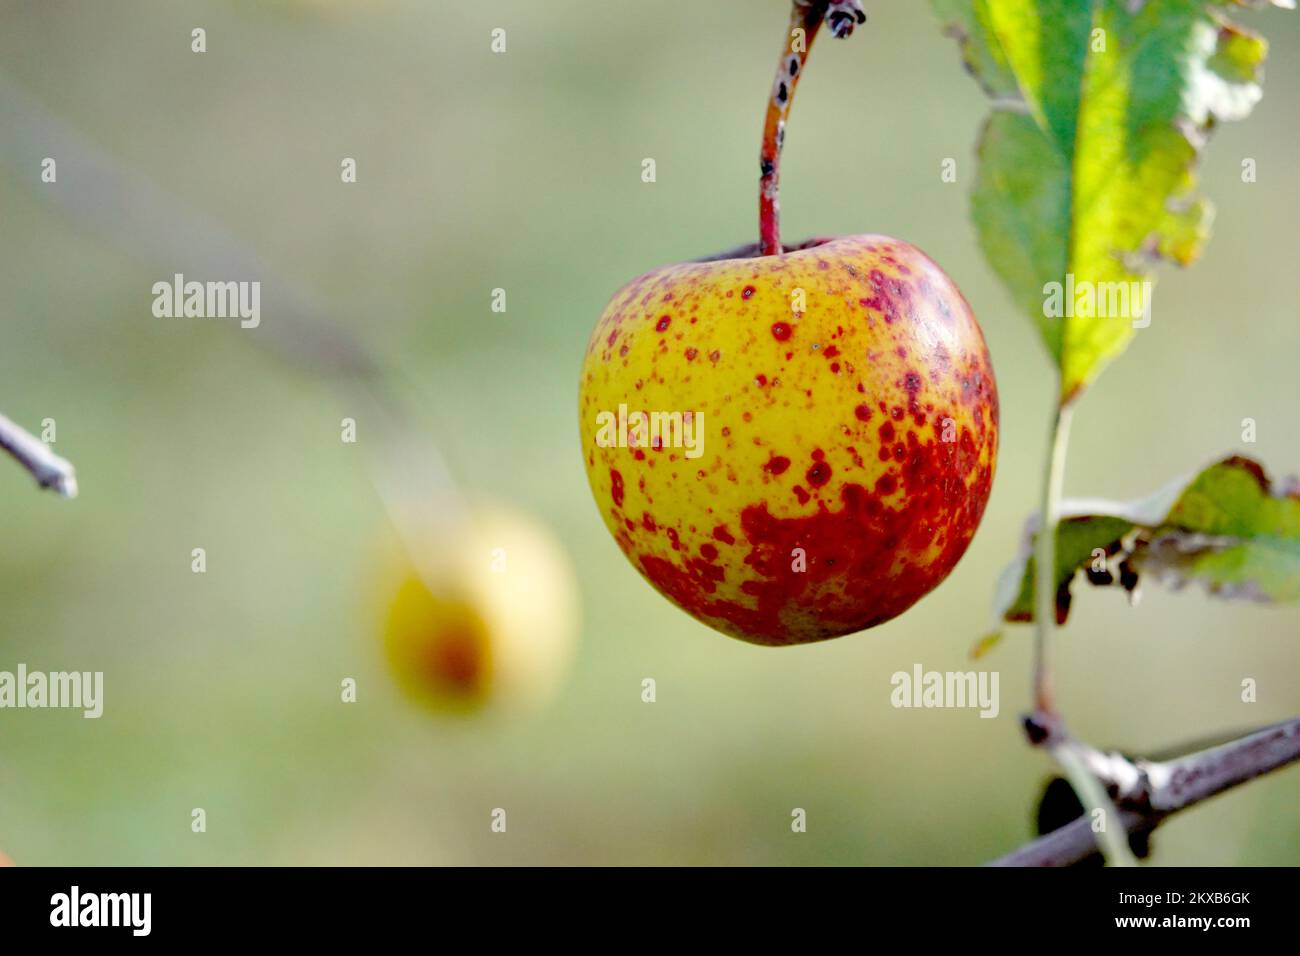 Red spotted golden apple close up. Stock Photo